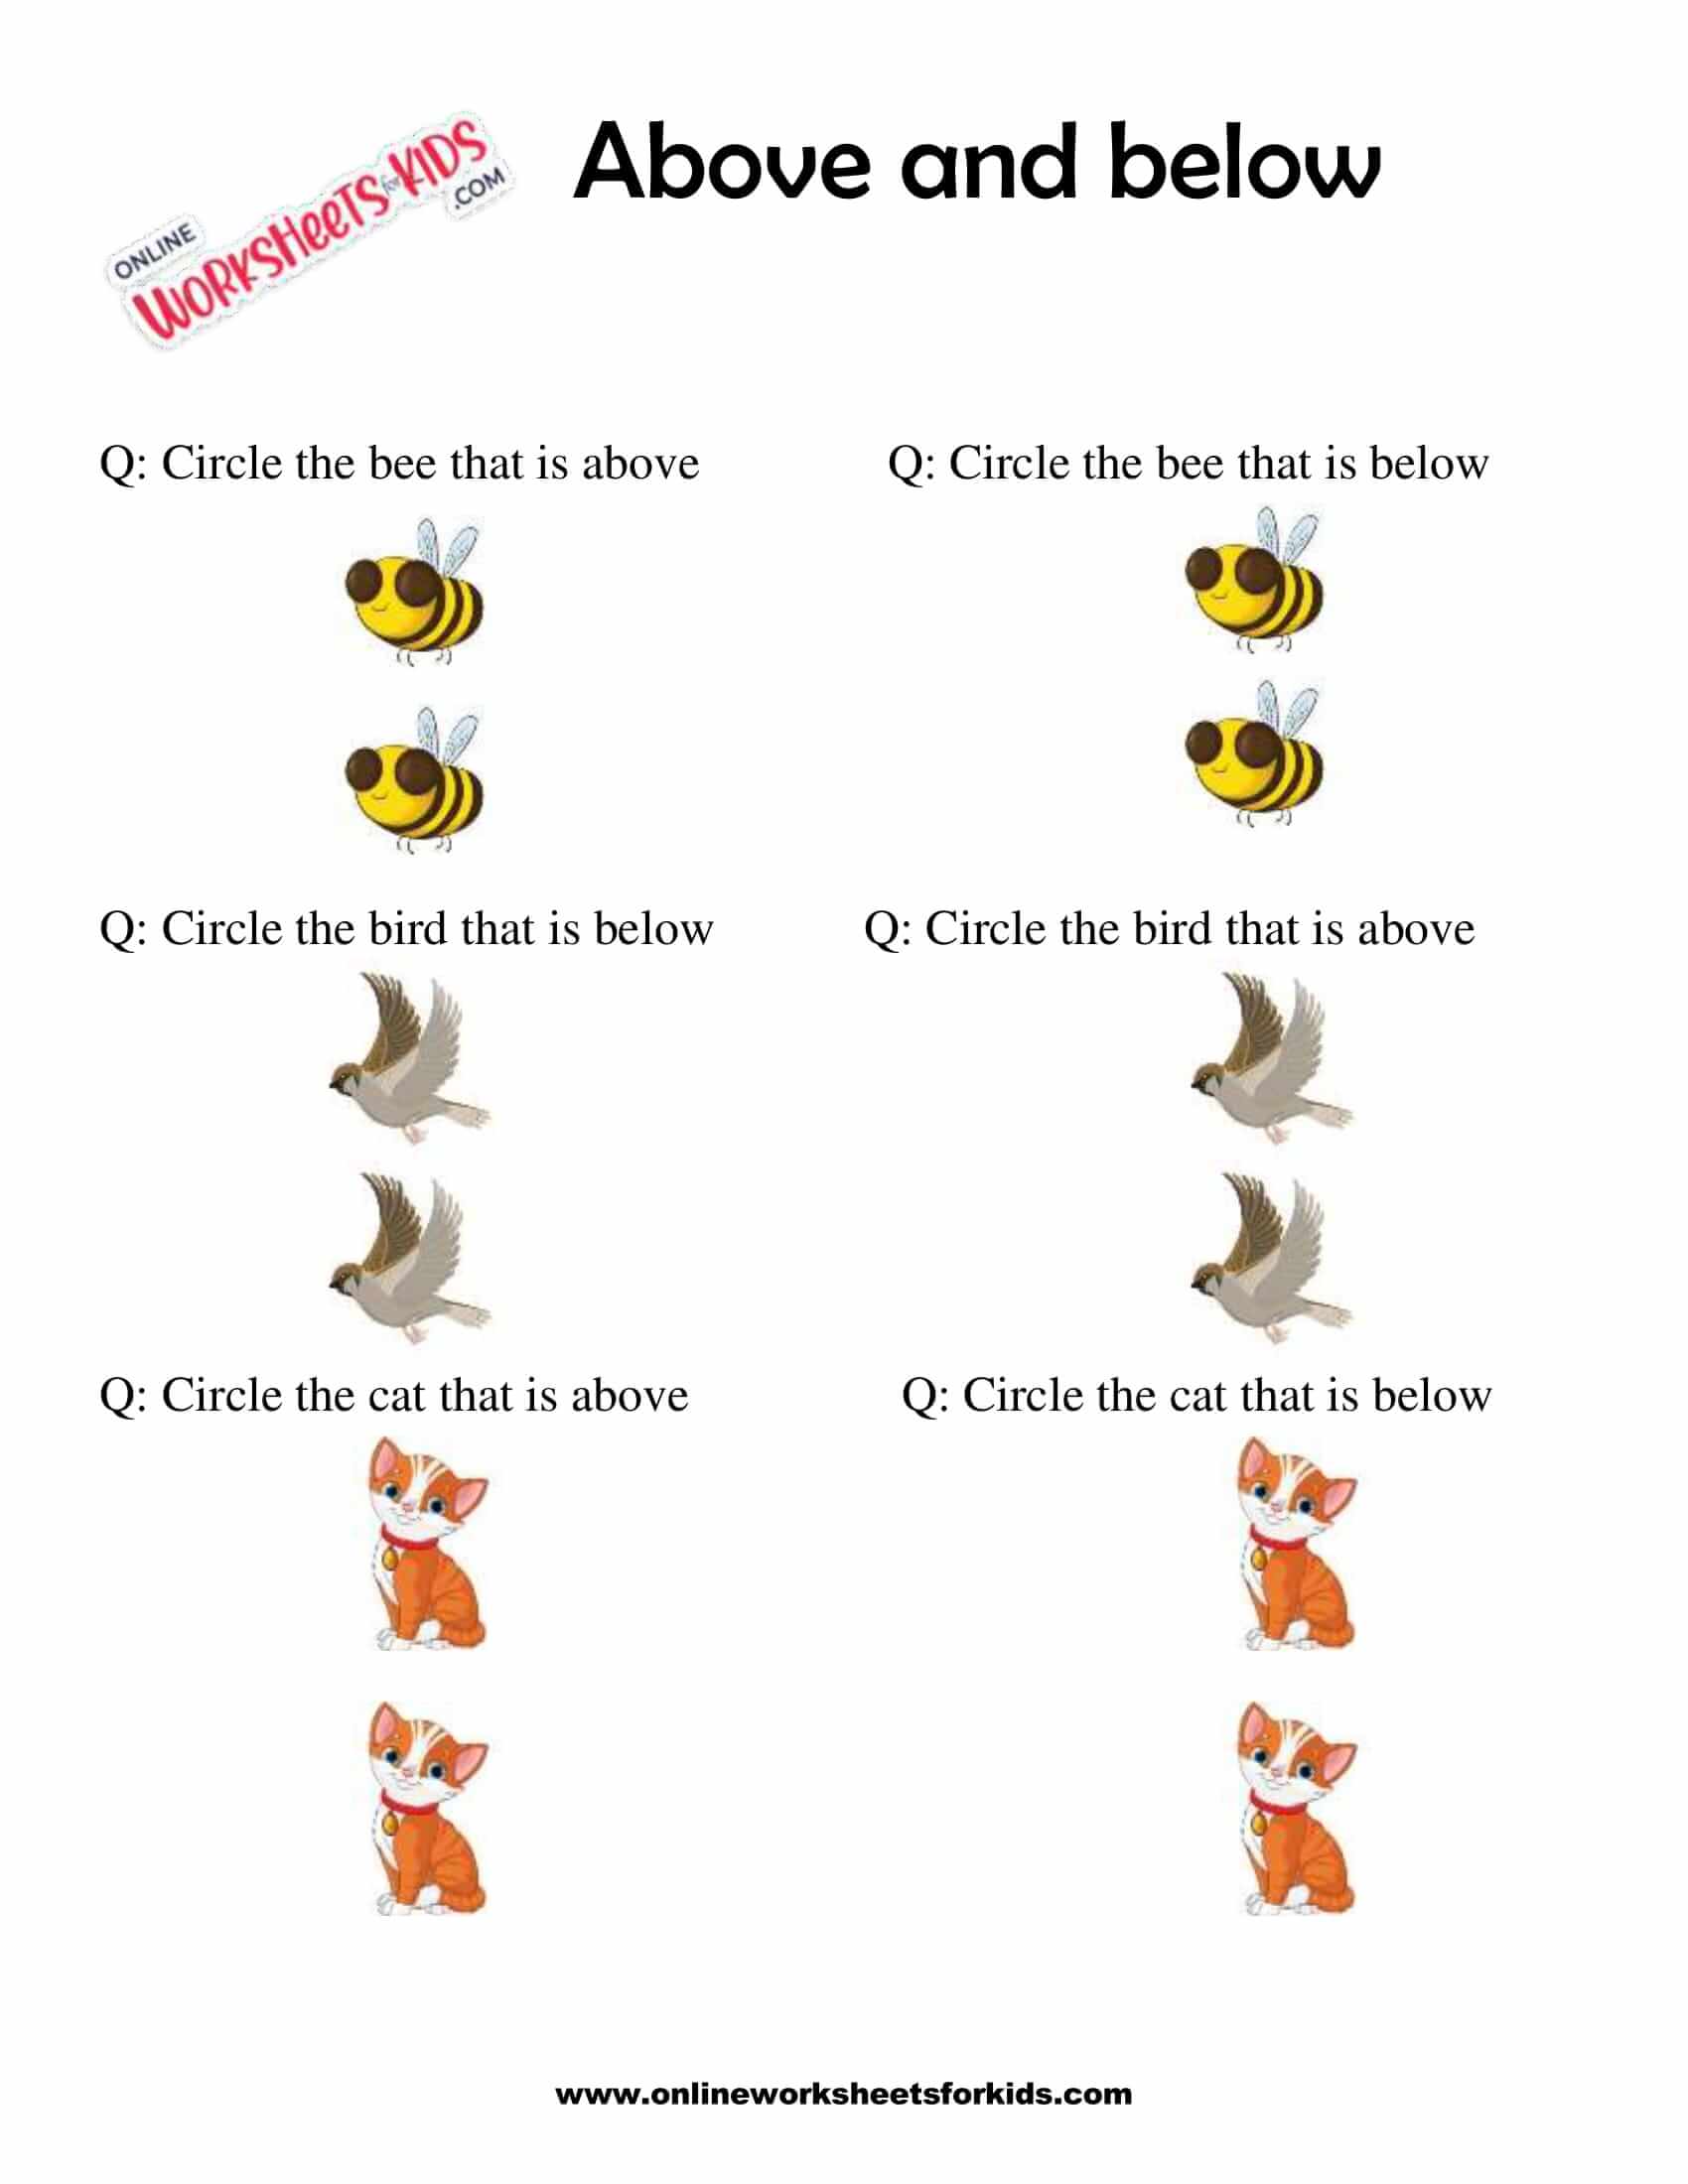 above-and-below-worksheets-5